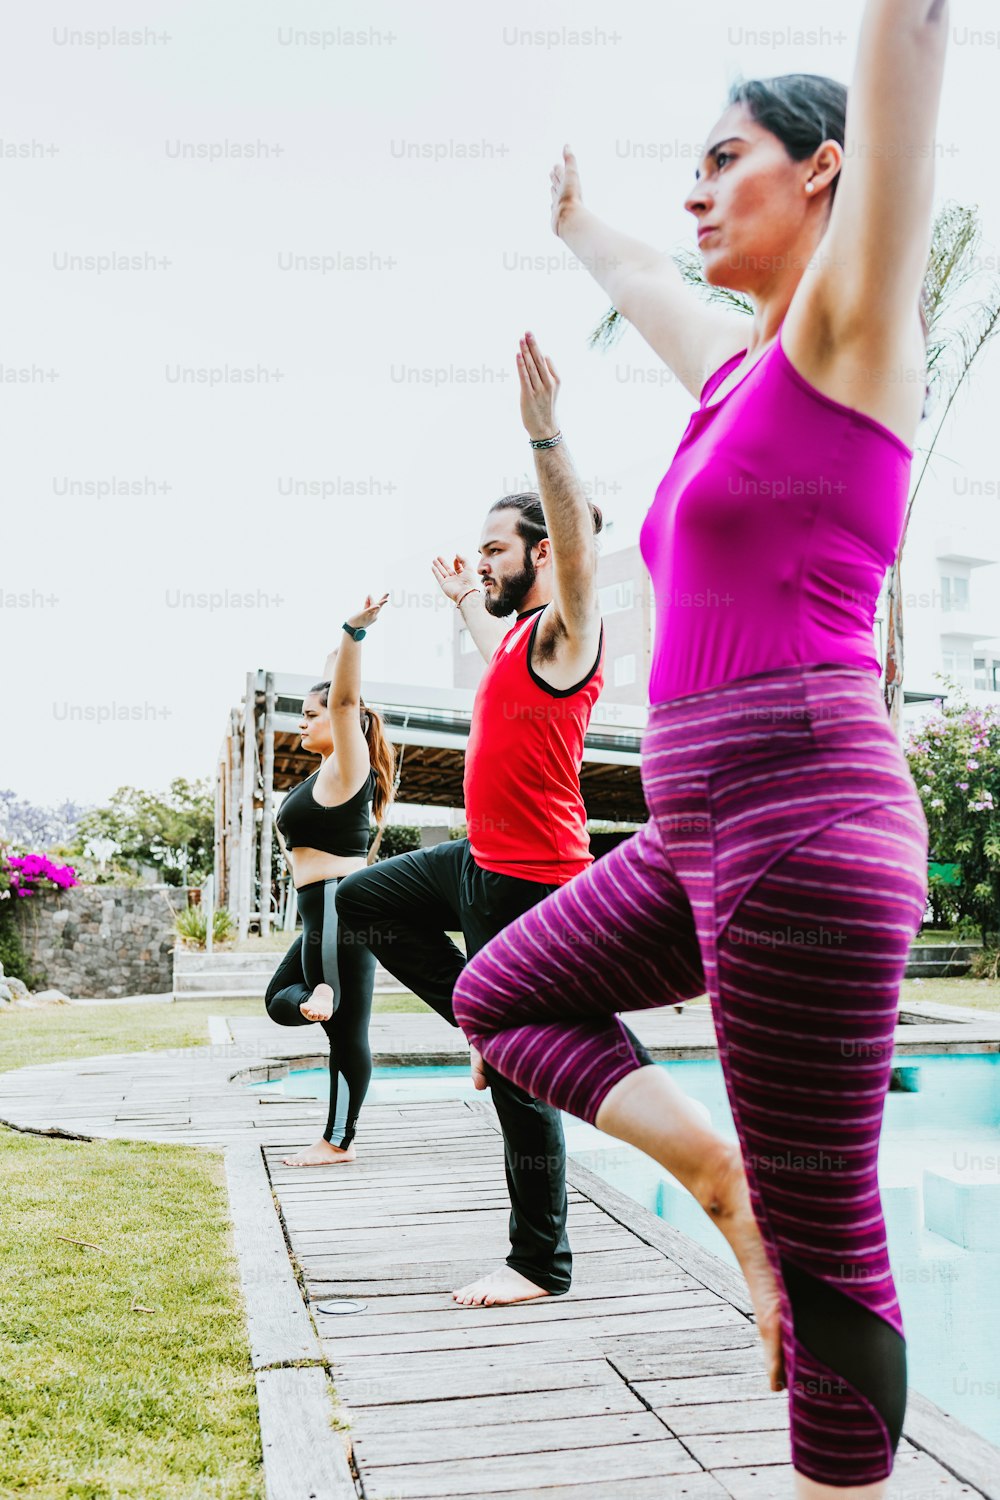 Group of latin people practicing yoga poses standing outdoors in Latin America